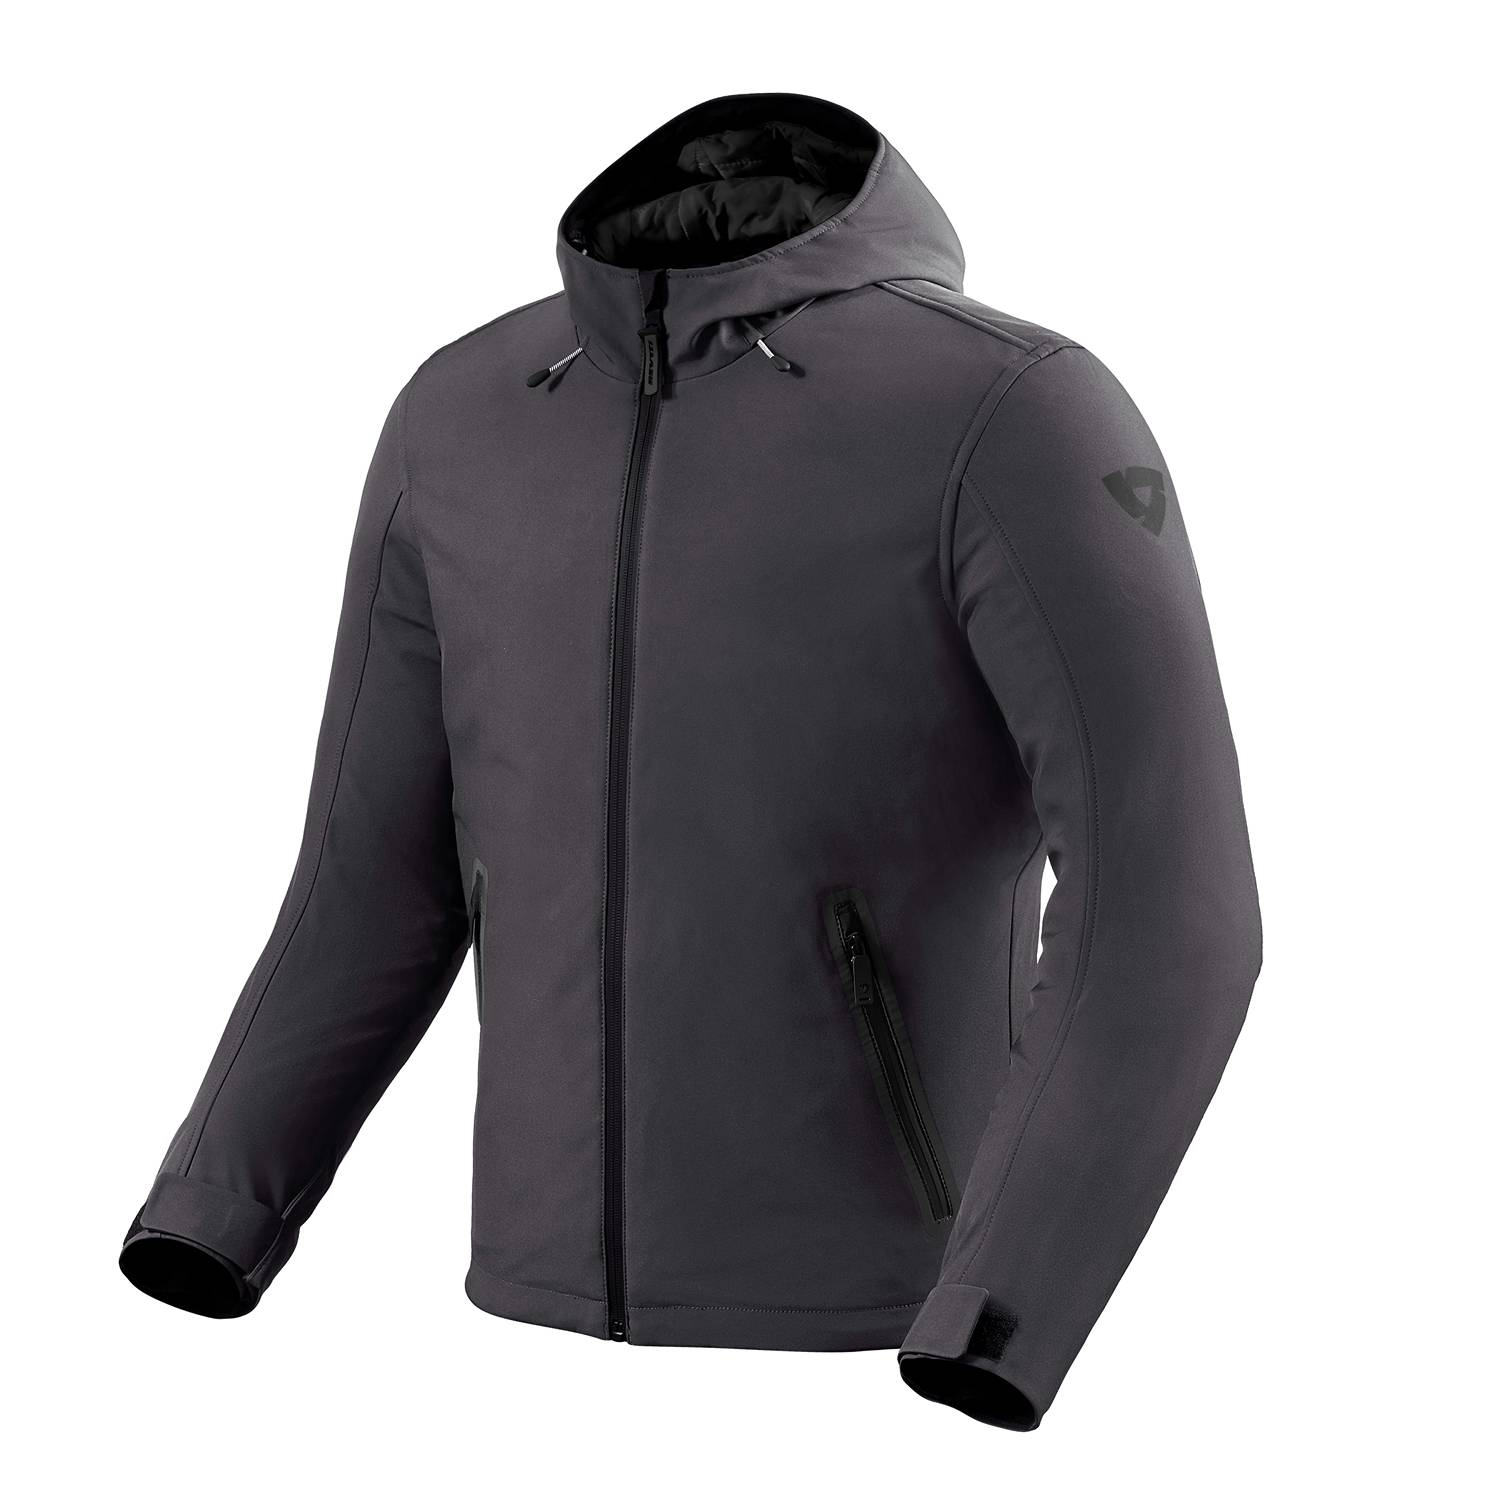 Image of REV'IT! Traffic H2O Veste Anthracite Taille M